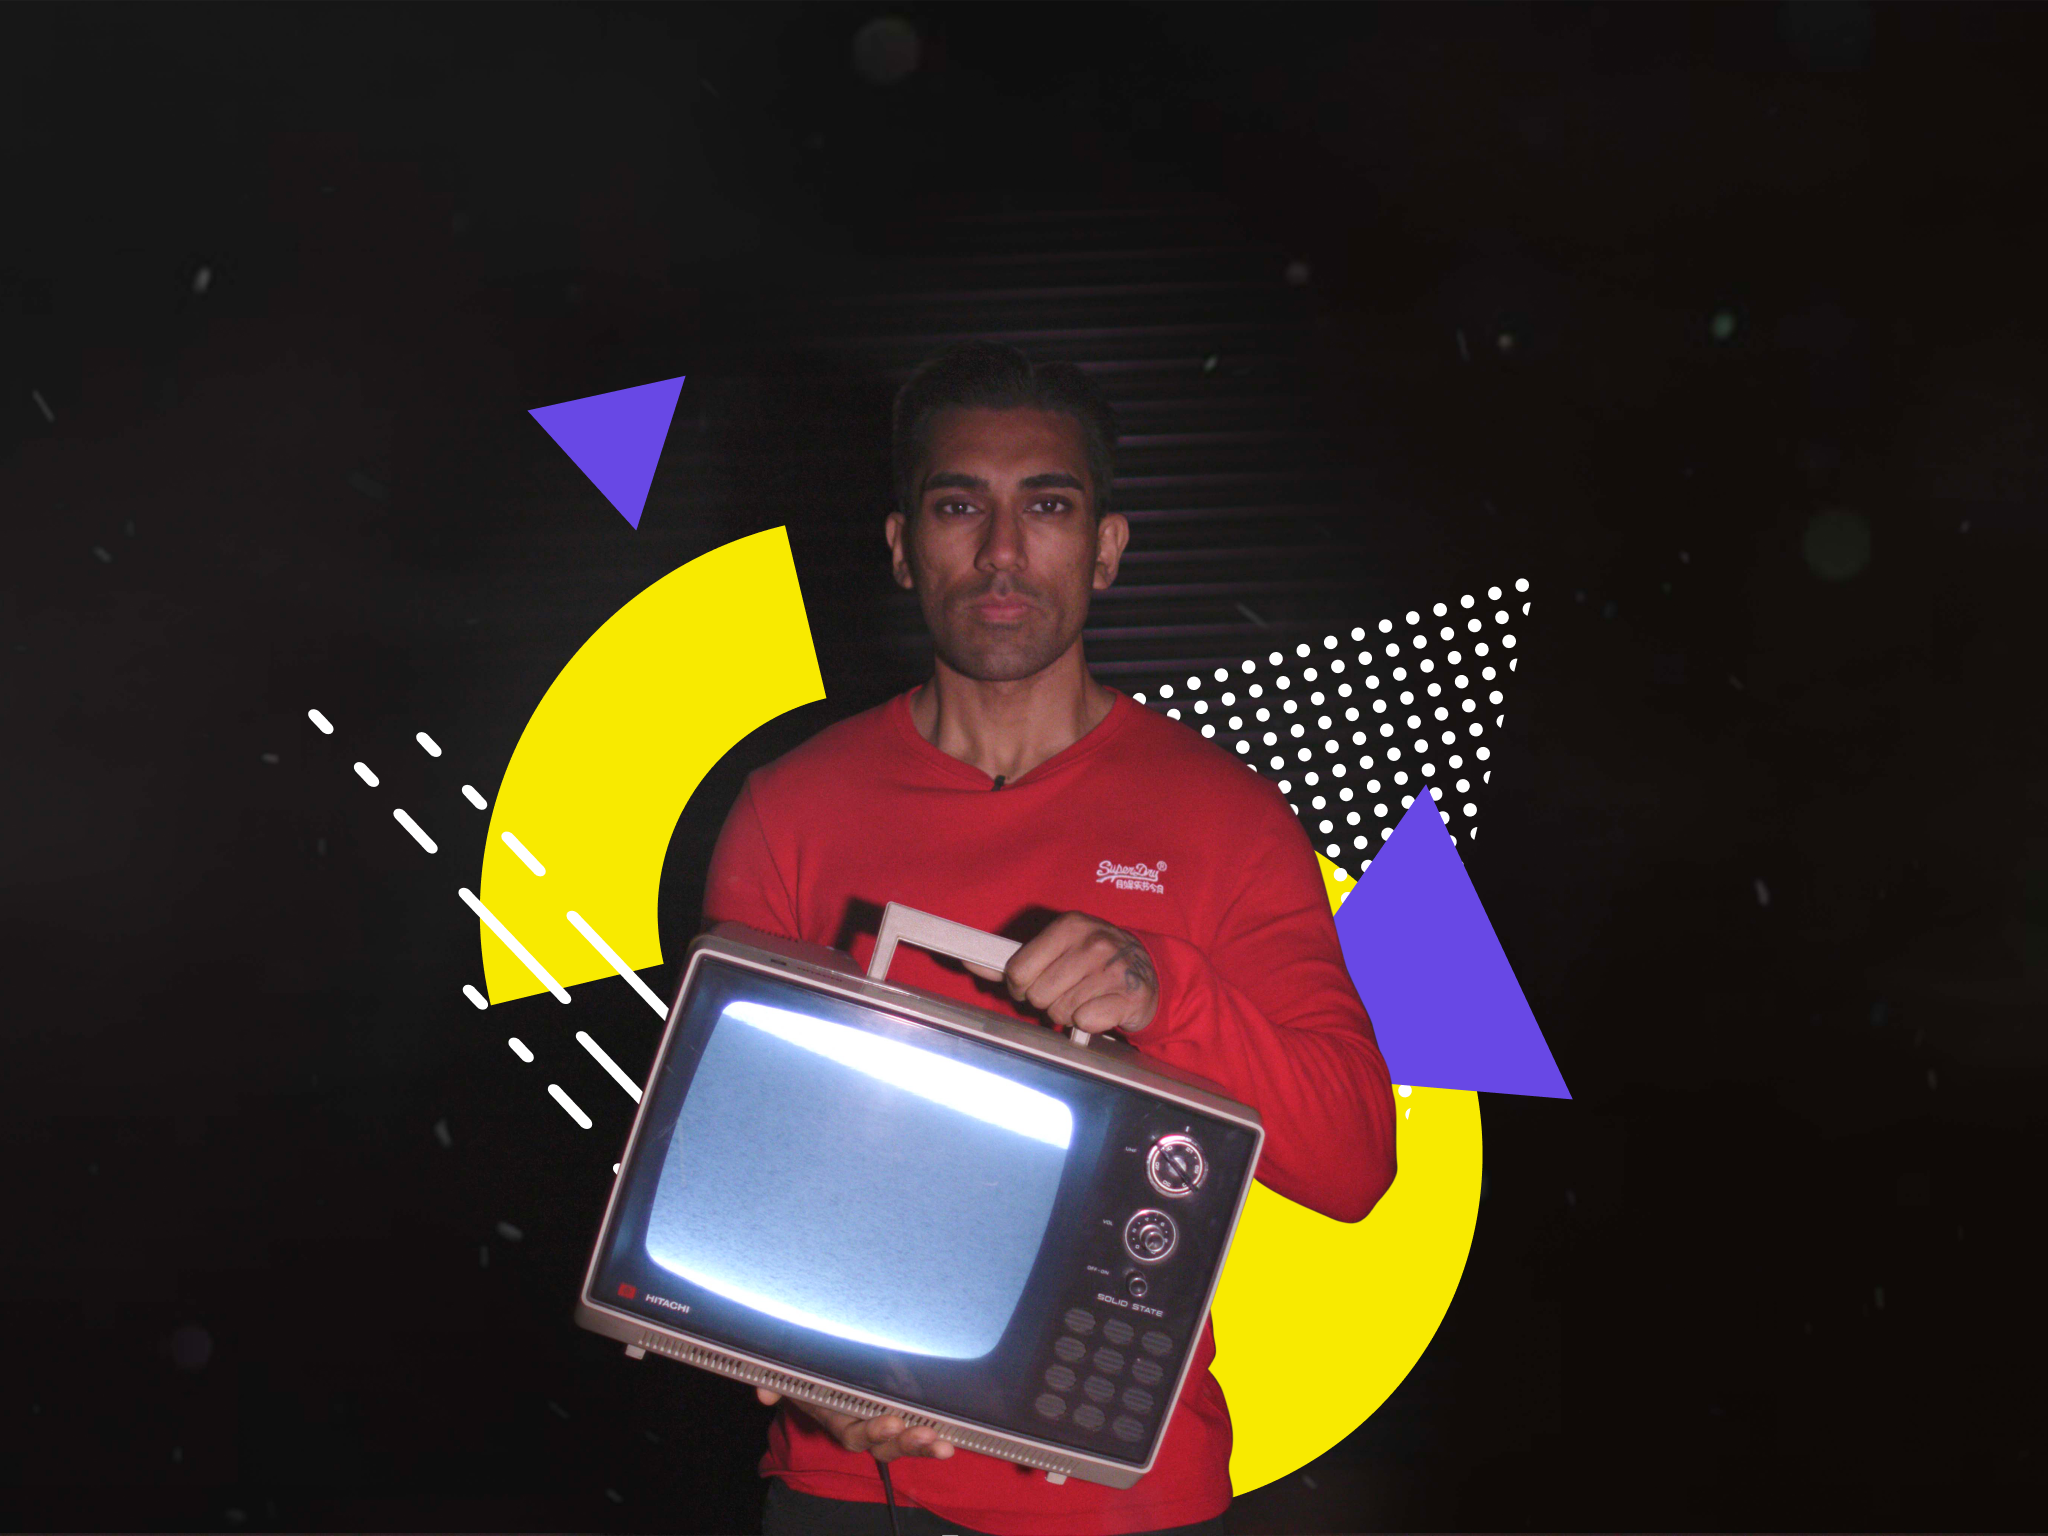 shot of co-founder Joey Xoto holding TV in the dark as part of Viddyoze personal brand story video.